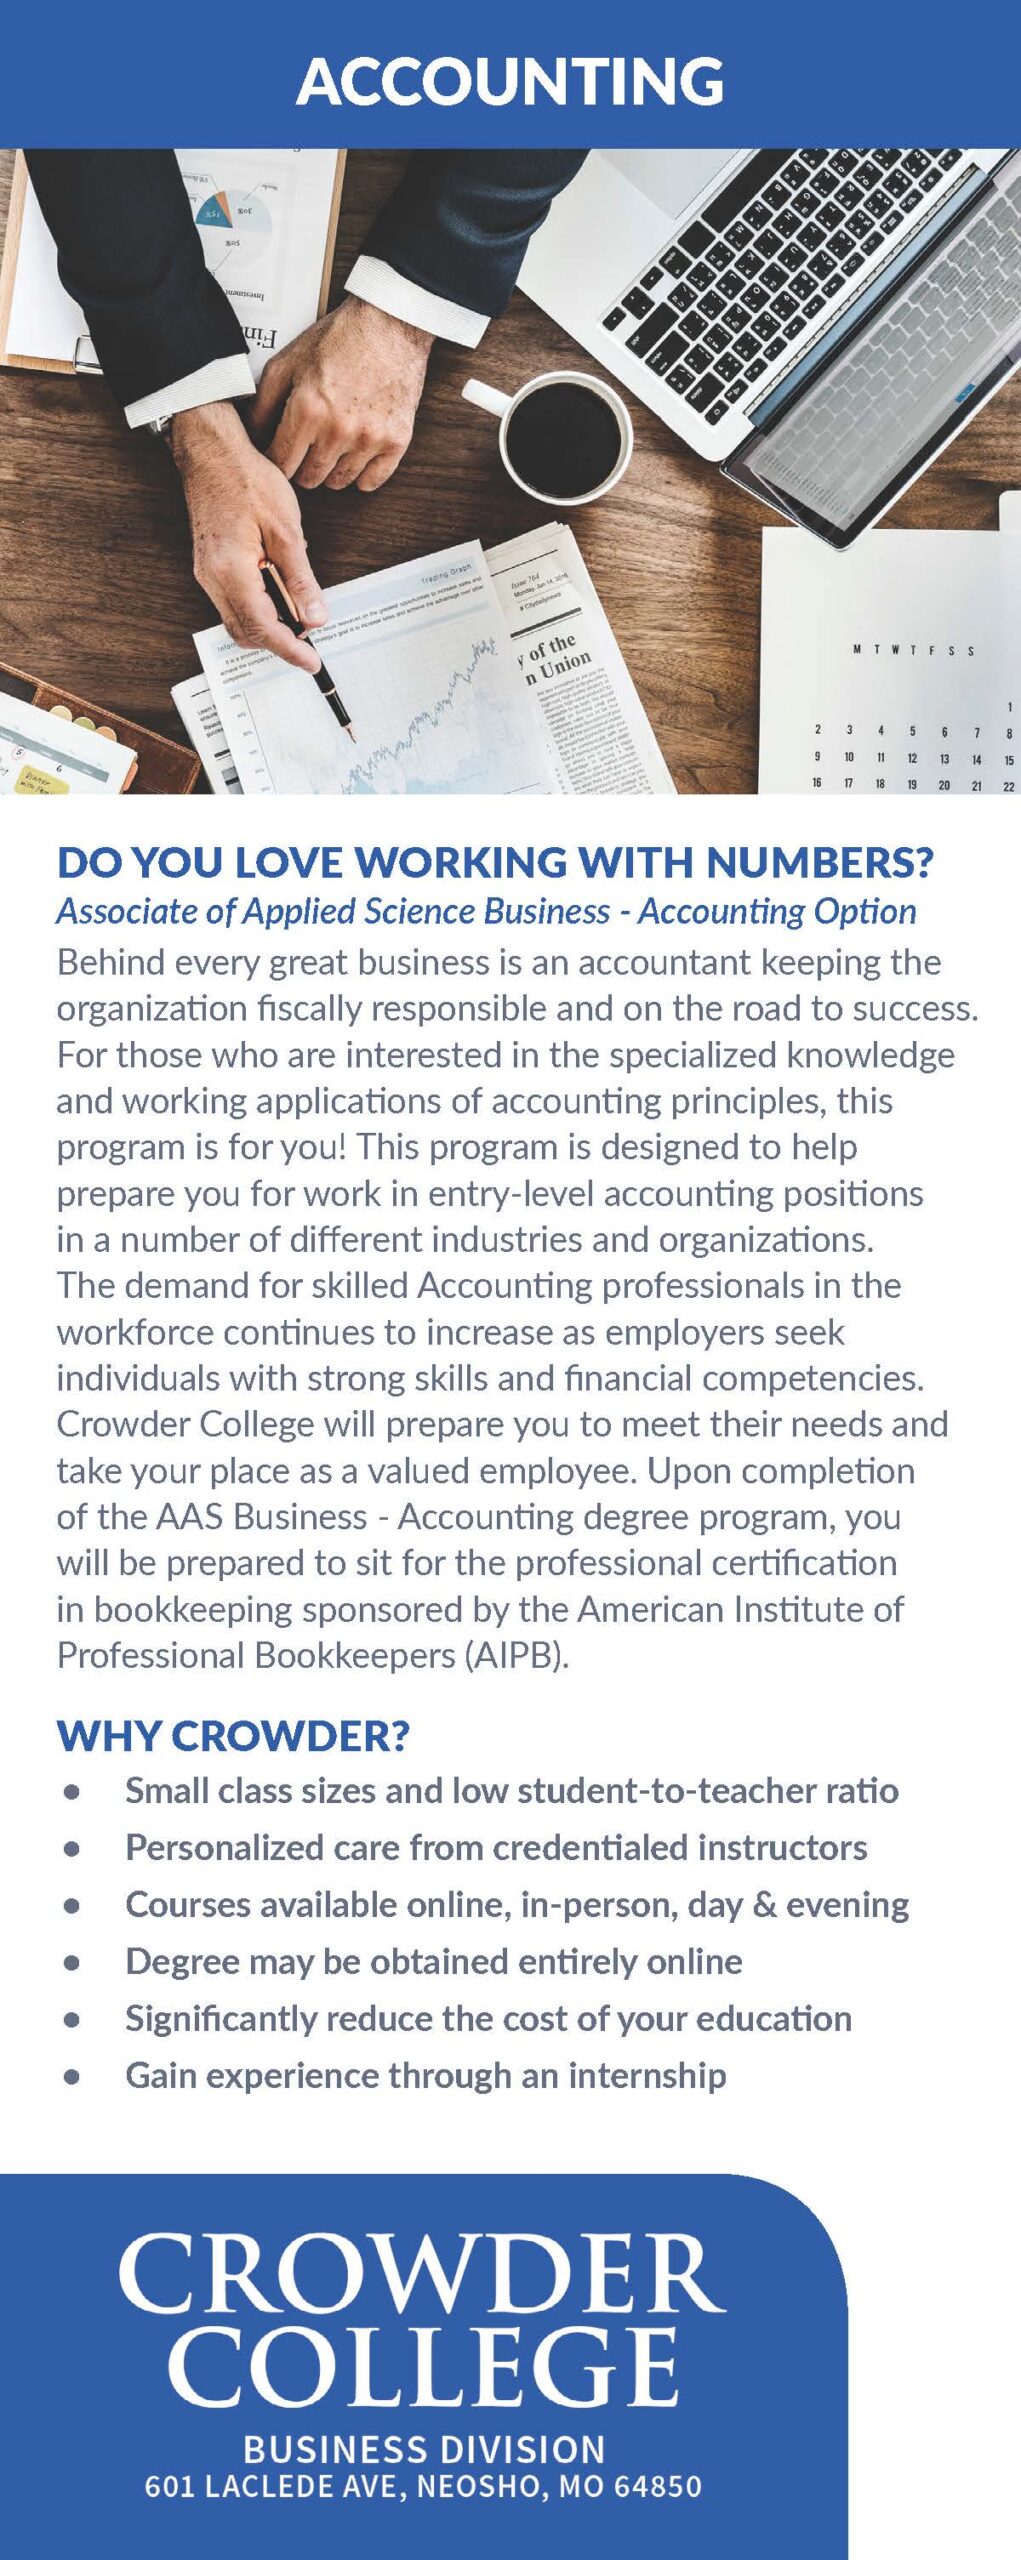 Information about Crowder College accounting program